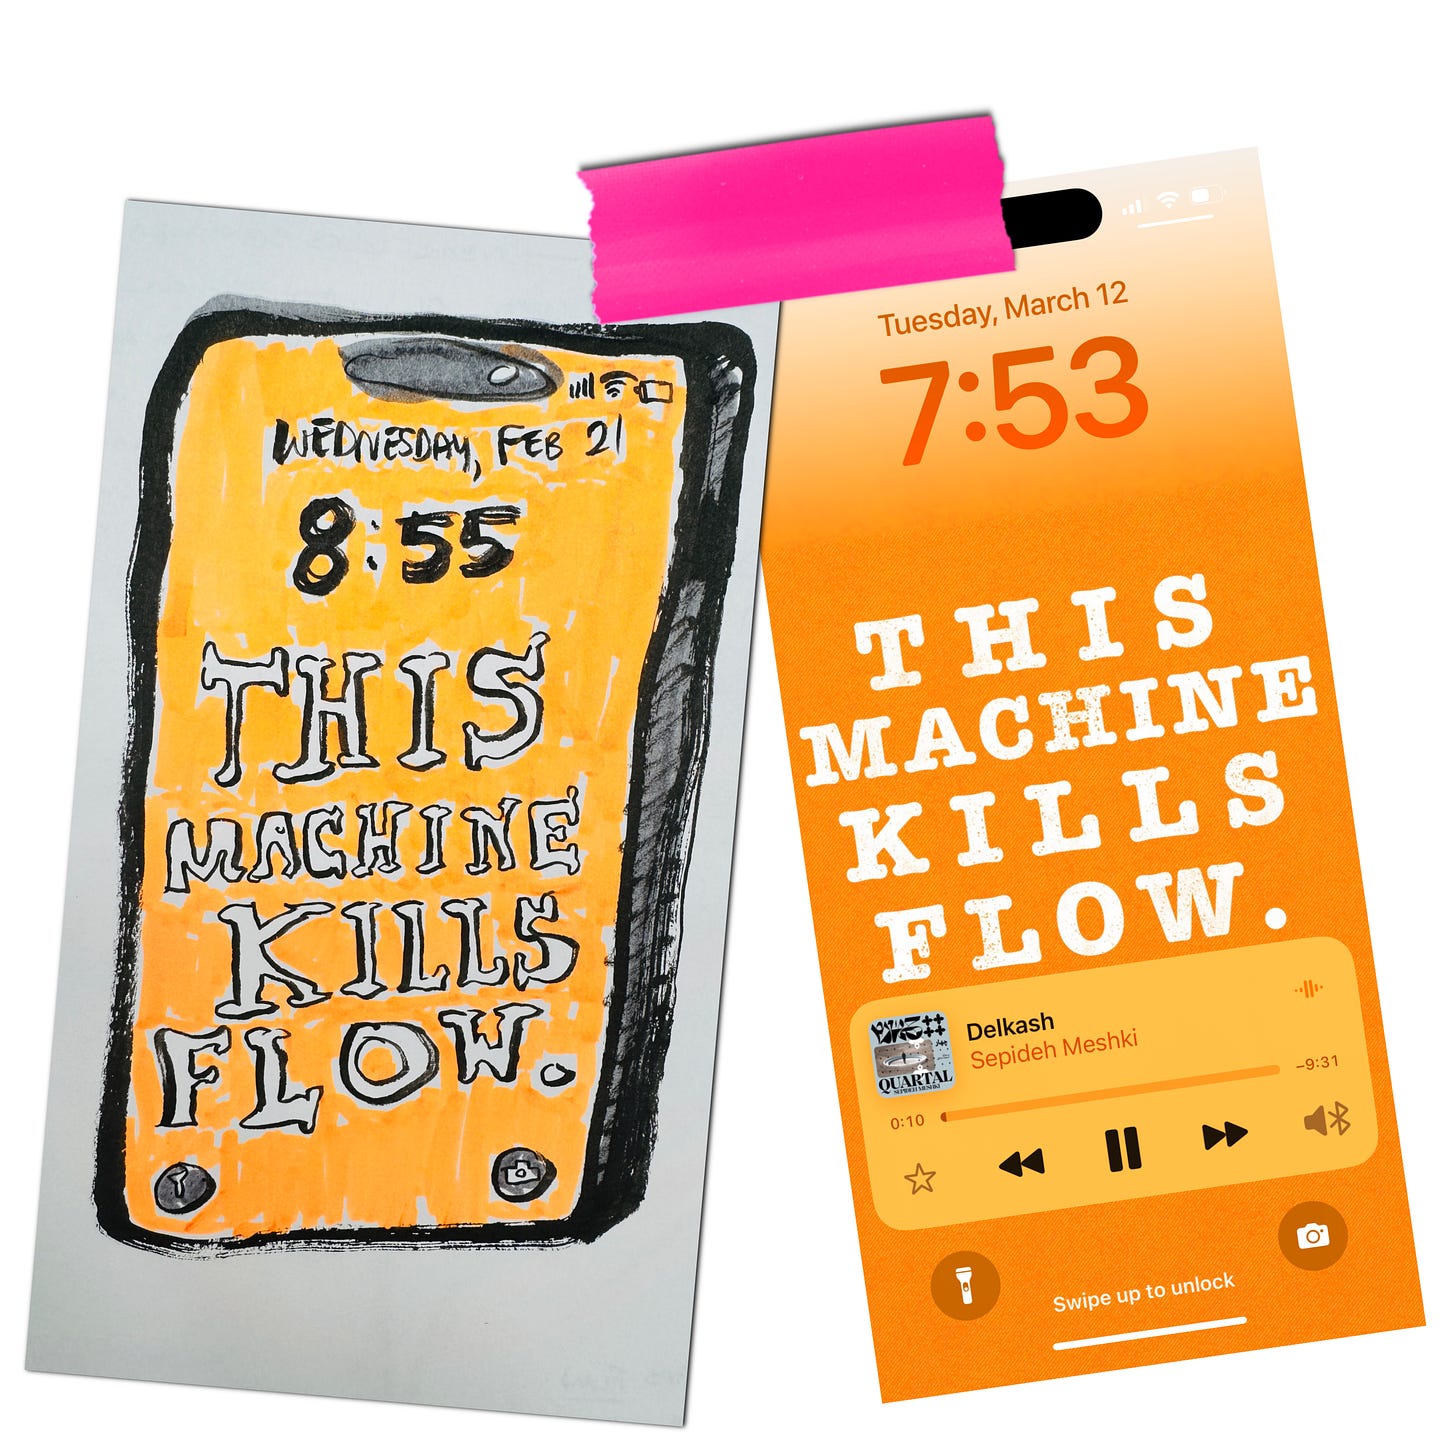 Lisette Murphy's drawing of an iphone screen with wallpaper reading, "this machine kills flow" is presented next to a screengrab of Lisette's real iphone showing a digital version of the same message